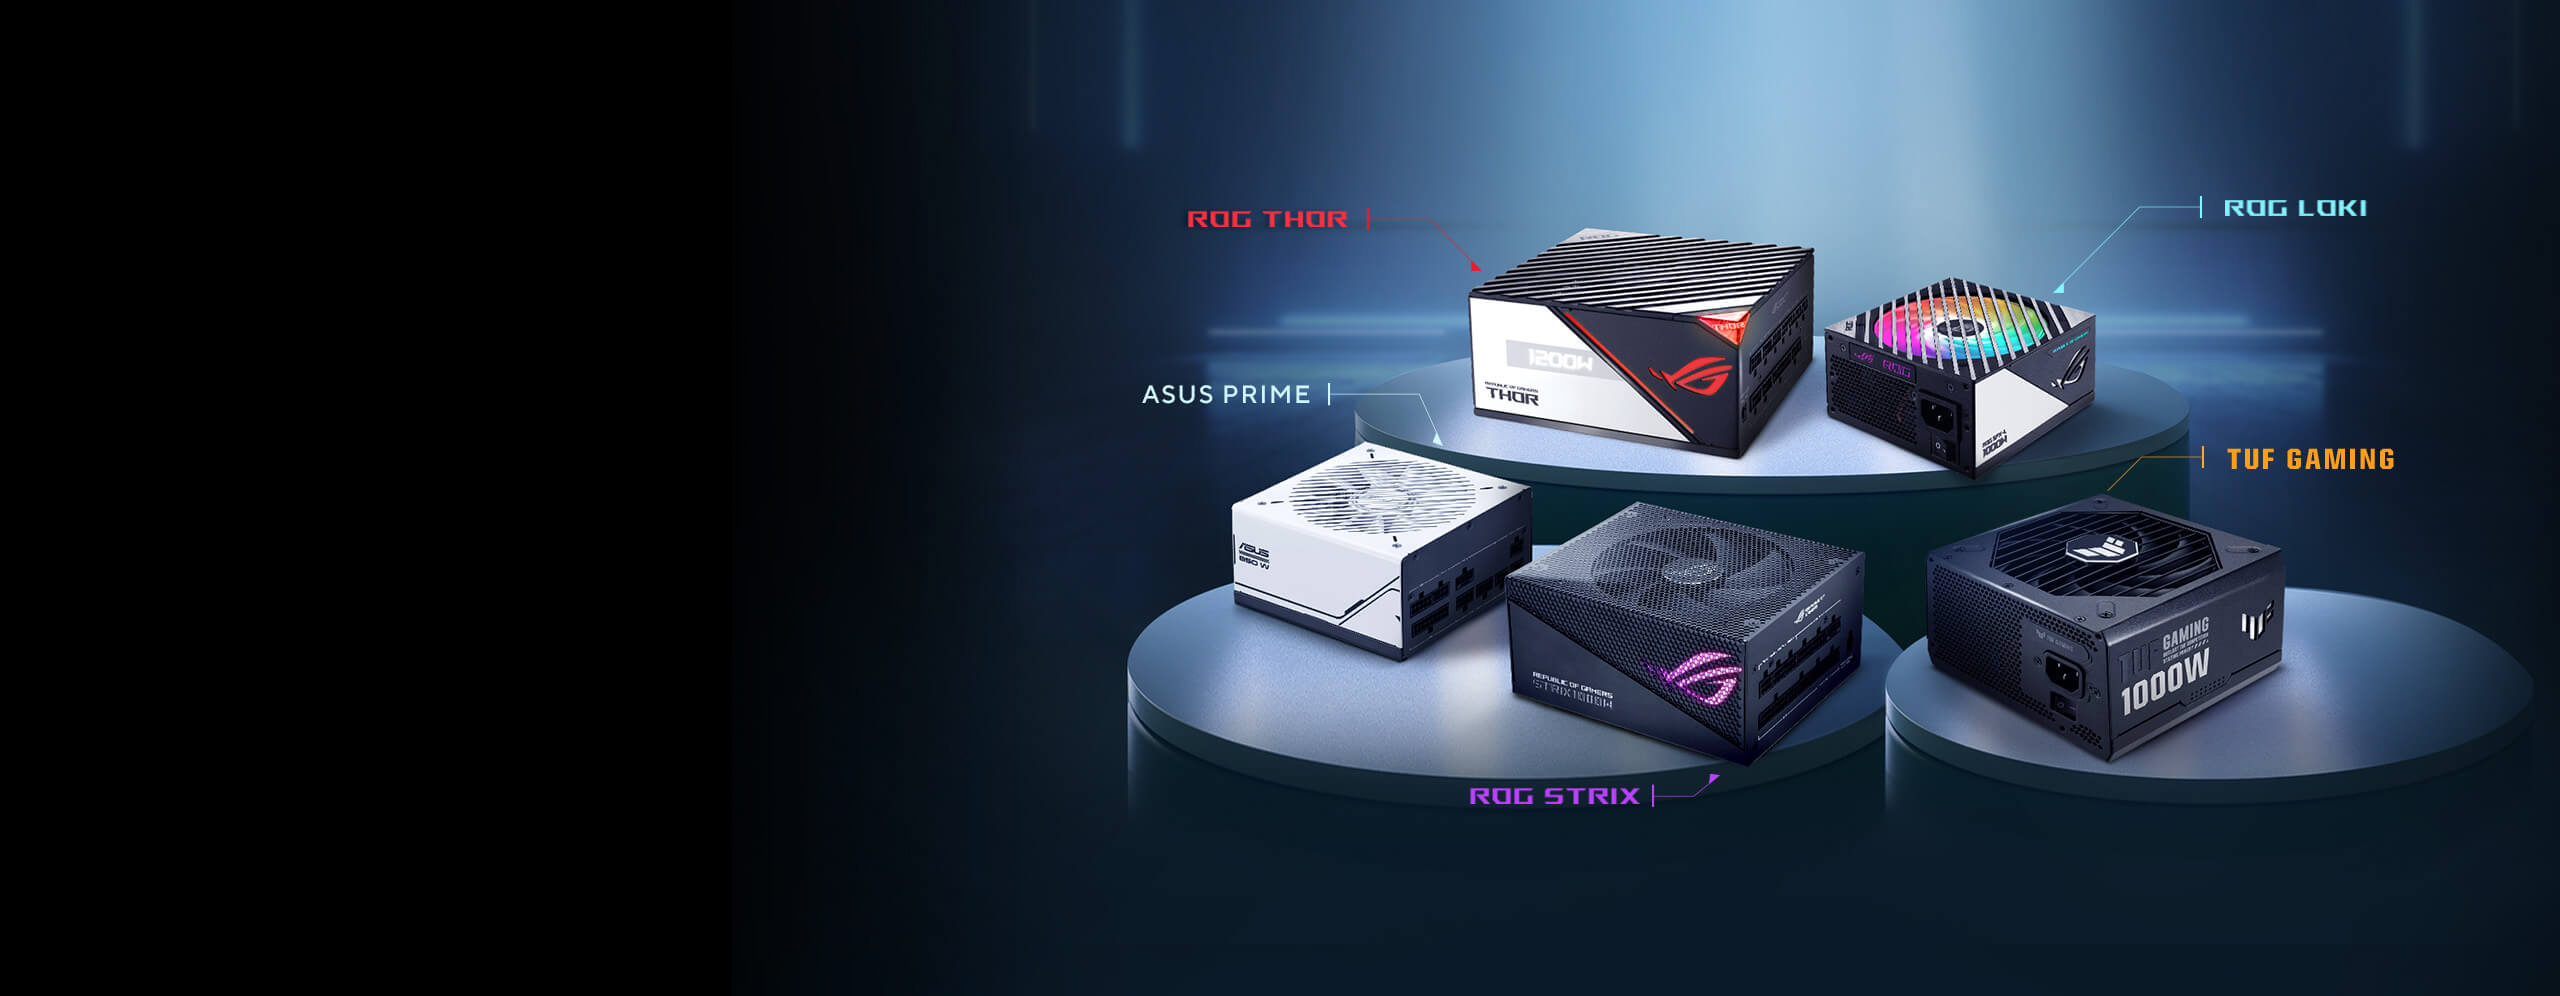 Use our wattage calculator to estimate how much power you'll need to fuel your rig, and then pick a compatible ROG Thor, ROG Loki or ROG Strix AURA power supply for ultimate performance.